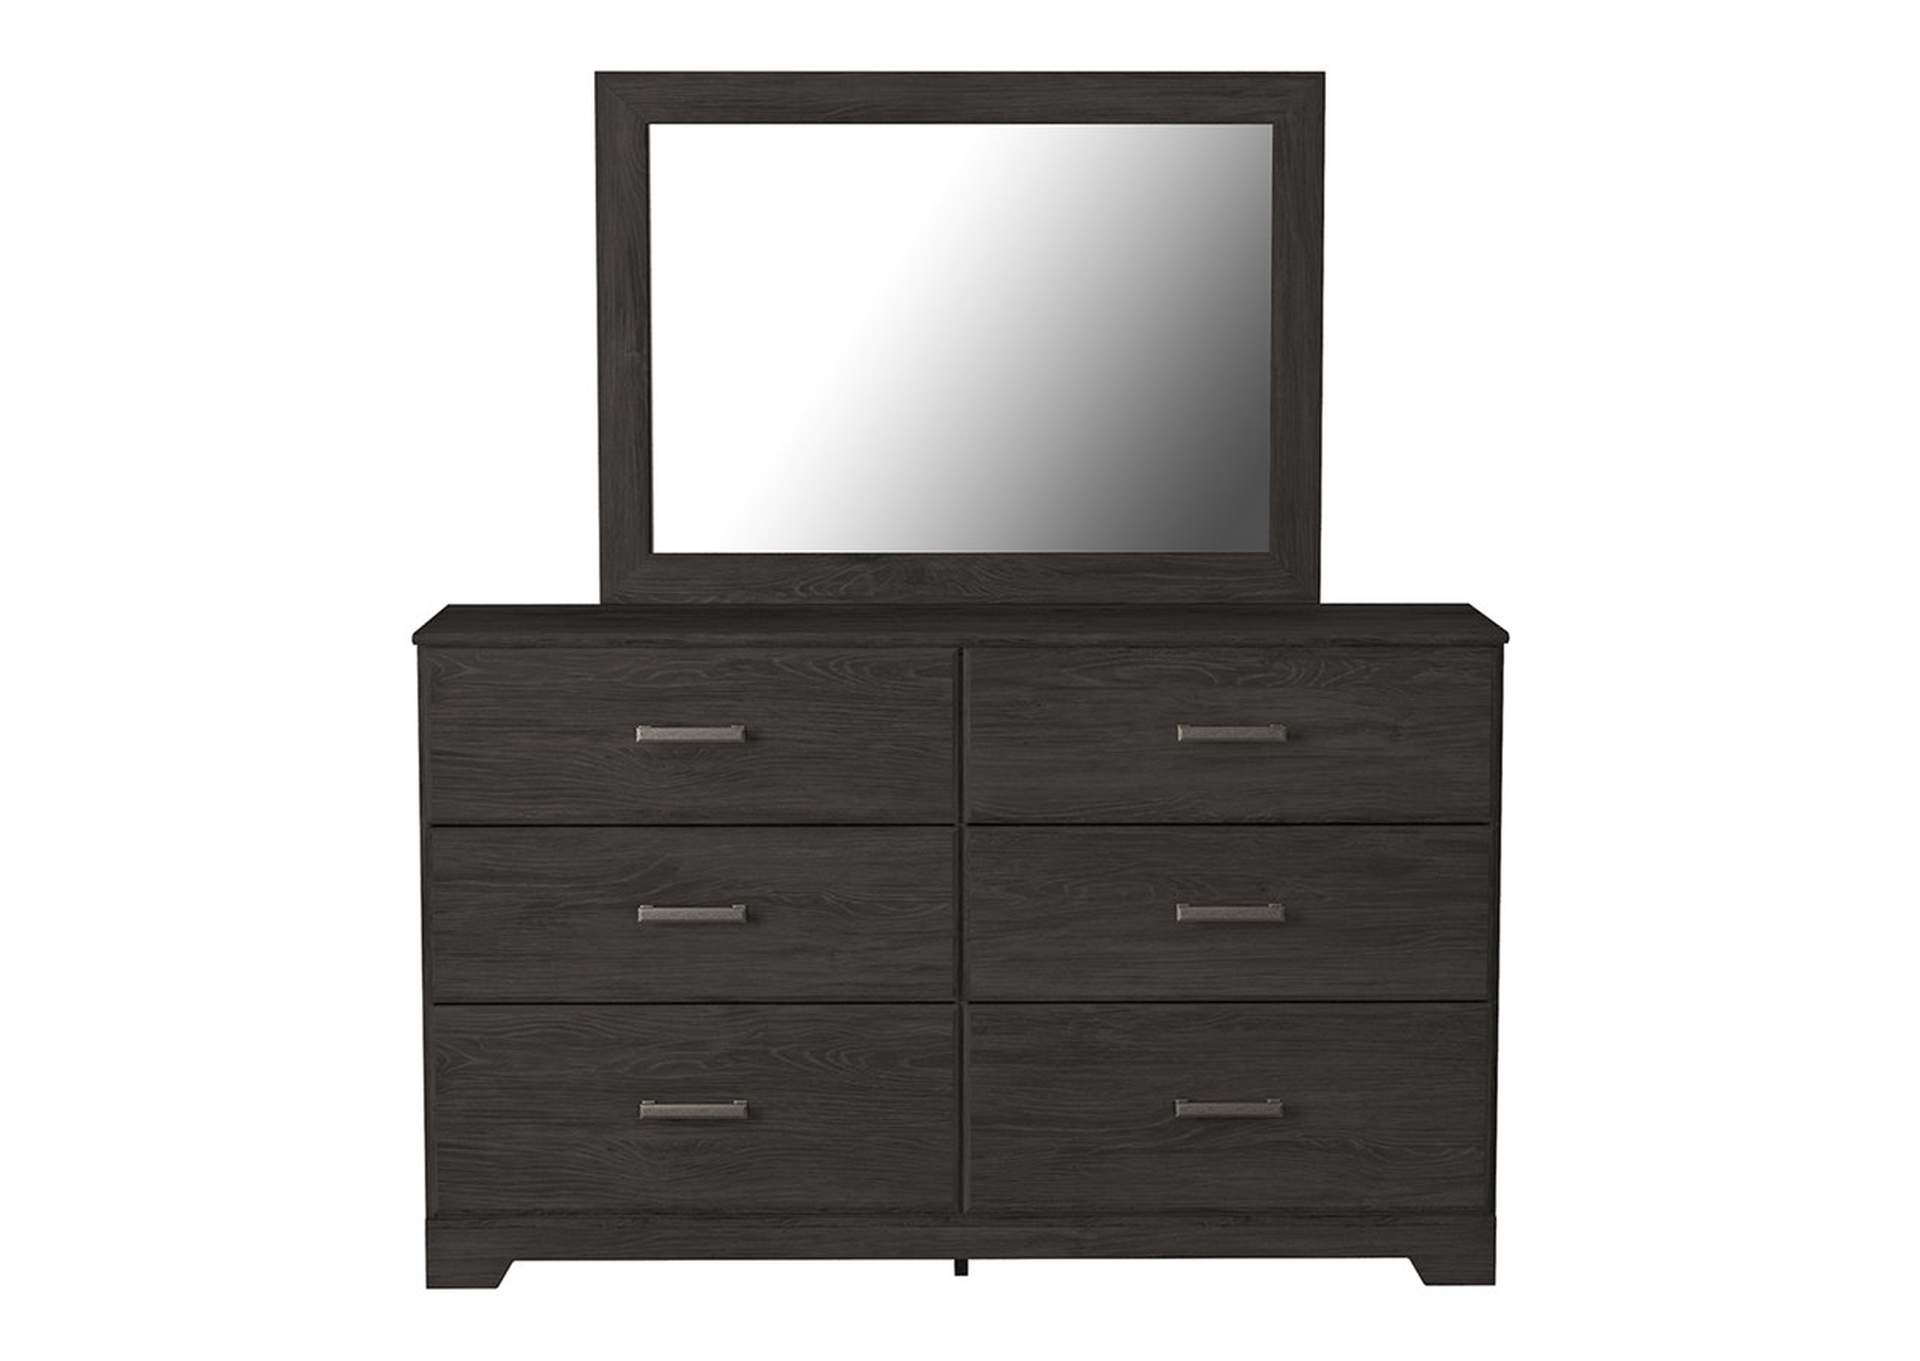 Belachime Dresser and Mirror,Signature Design By Ashley